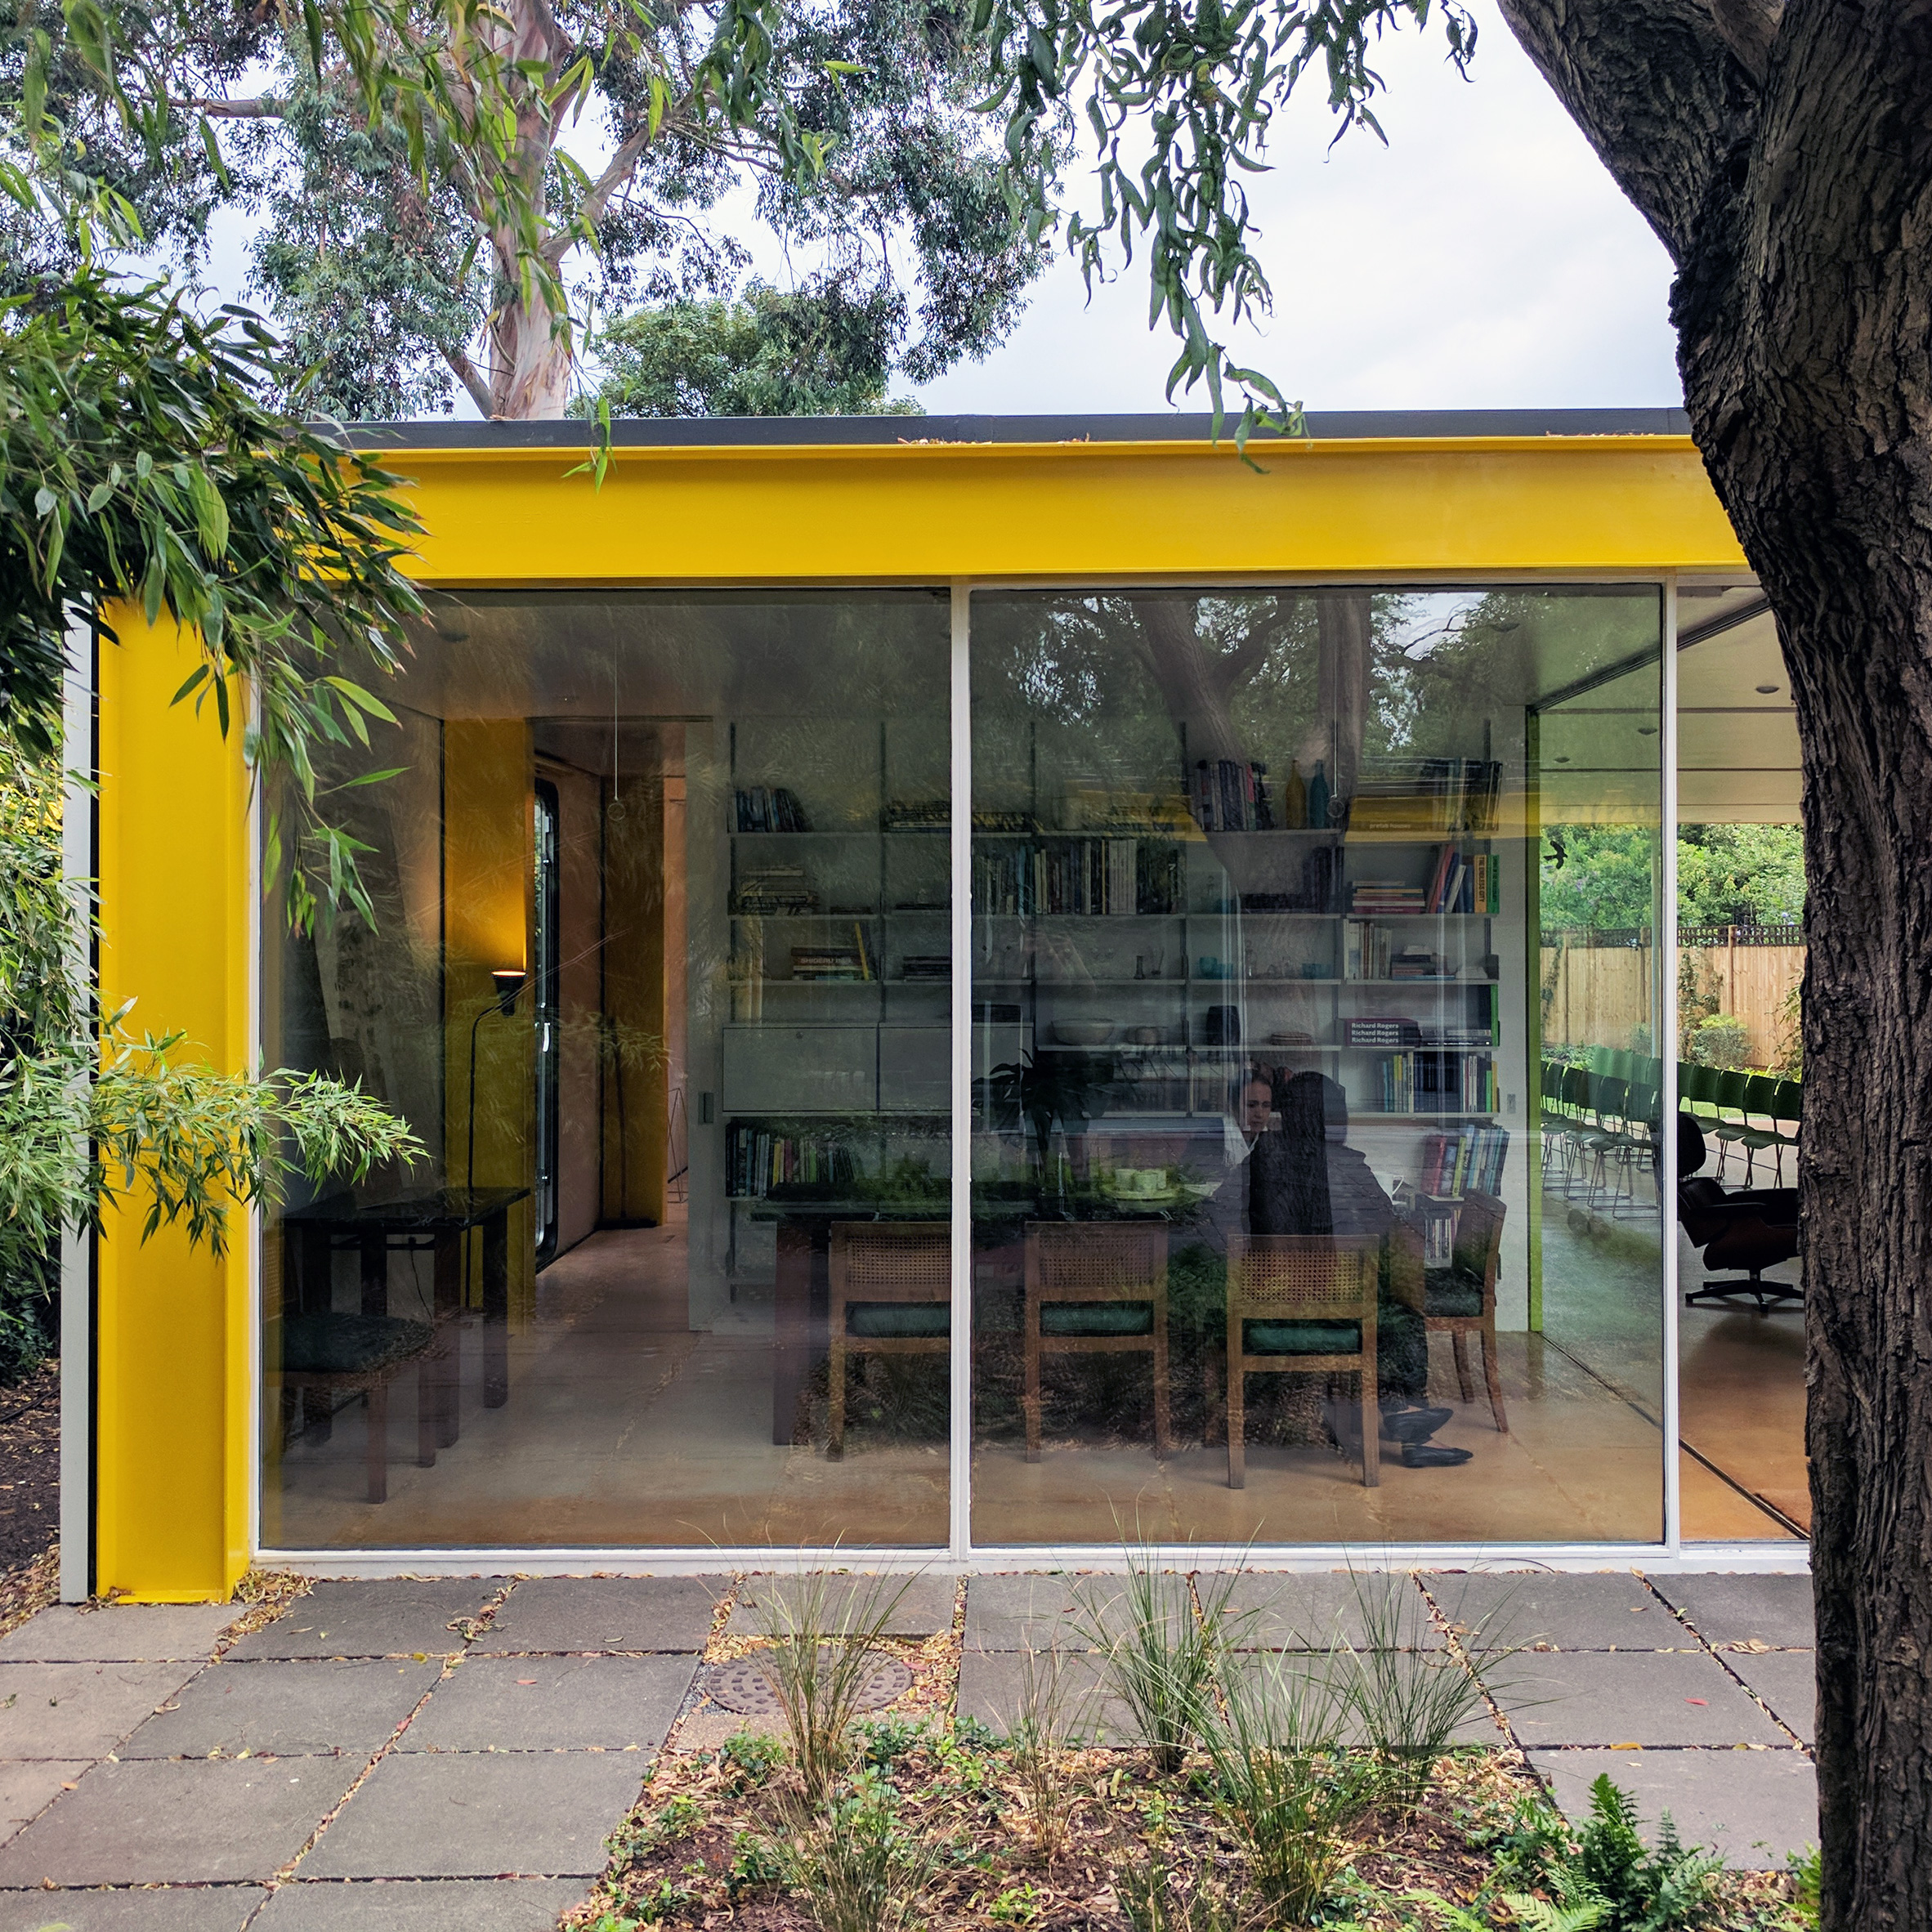 22 Parkside by Richard Rogers